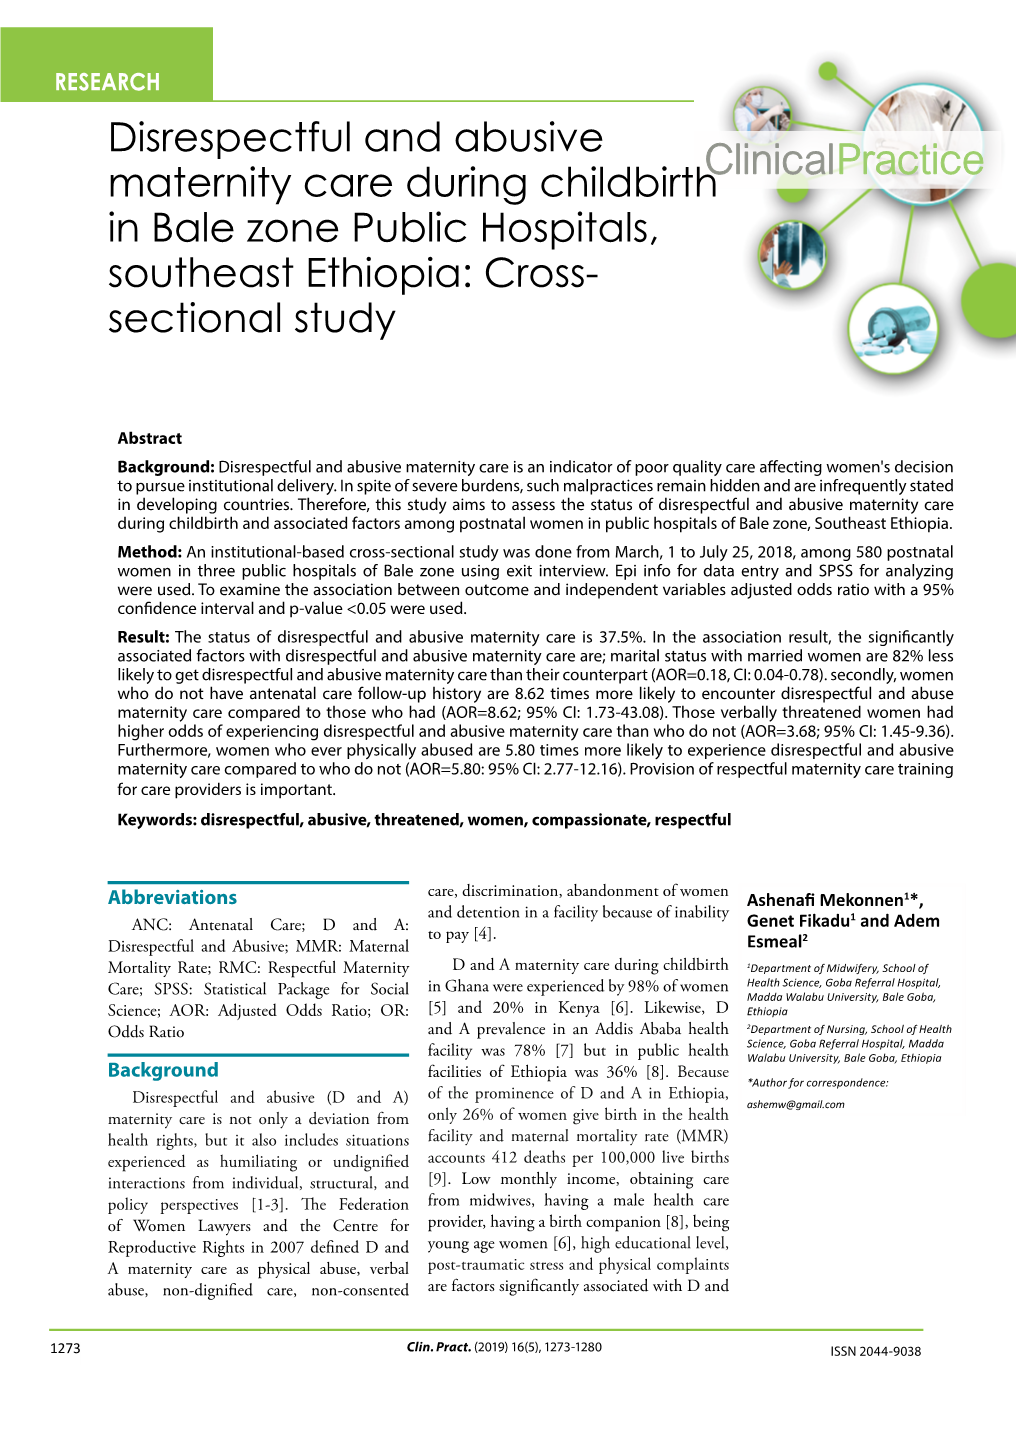 Disrespectful and Abusive Maternity Care During Childbirth in Bale Zone Public Hospitals, Southeast Ethiopia: Cross- Sectional Study